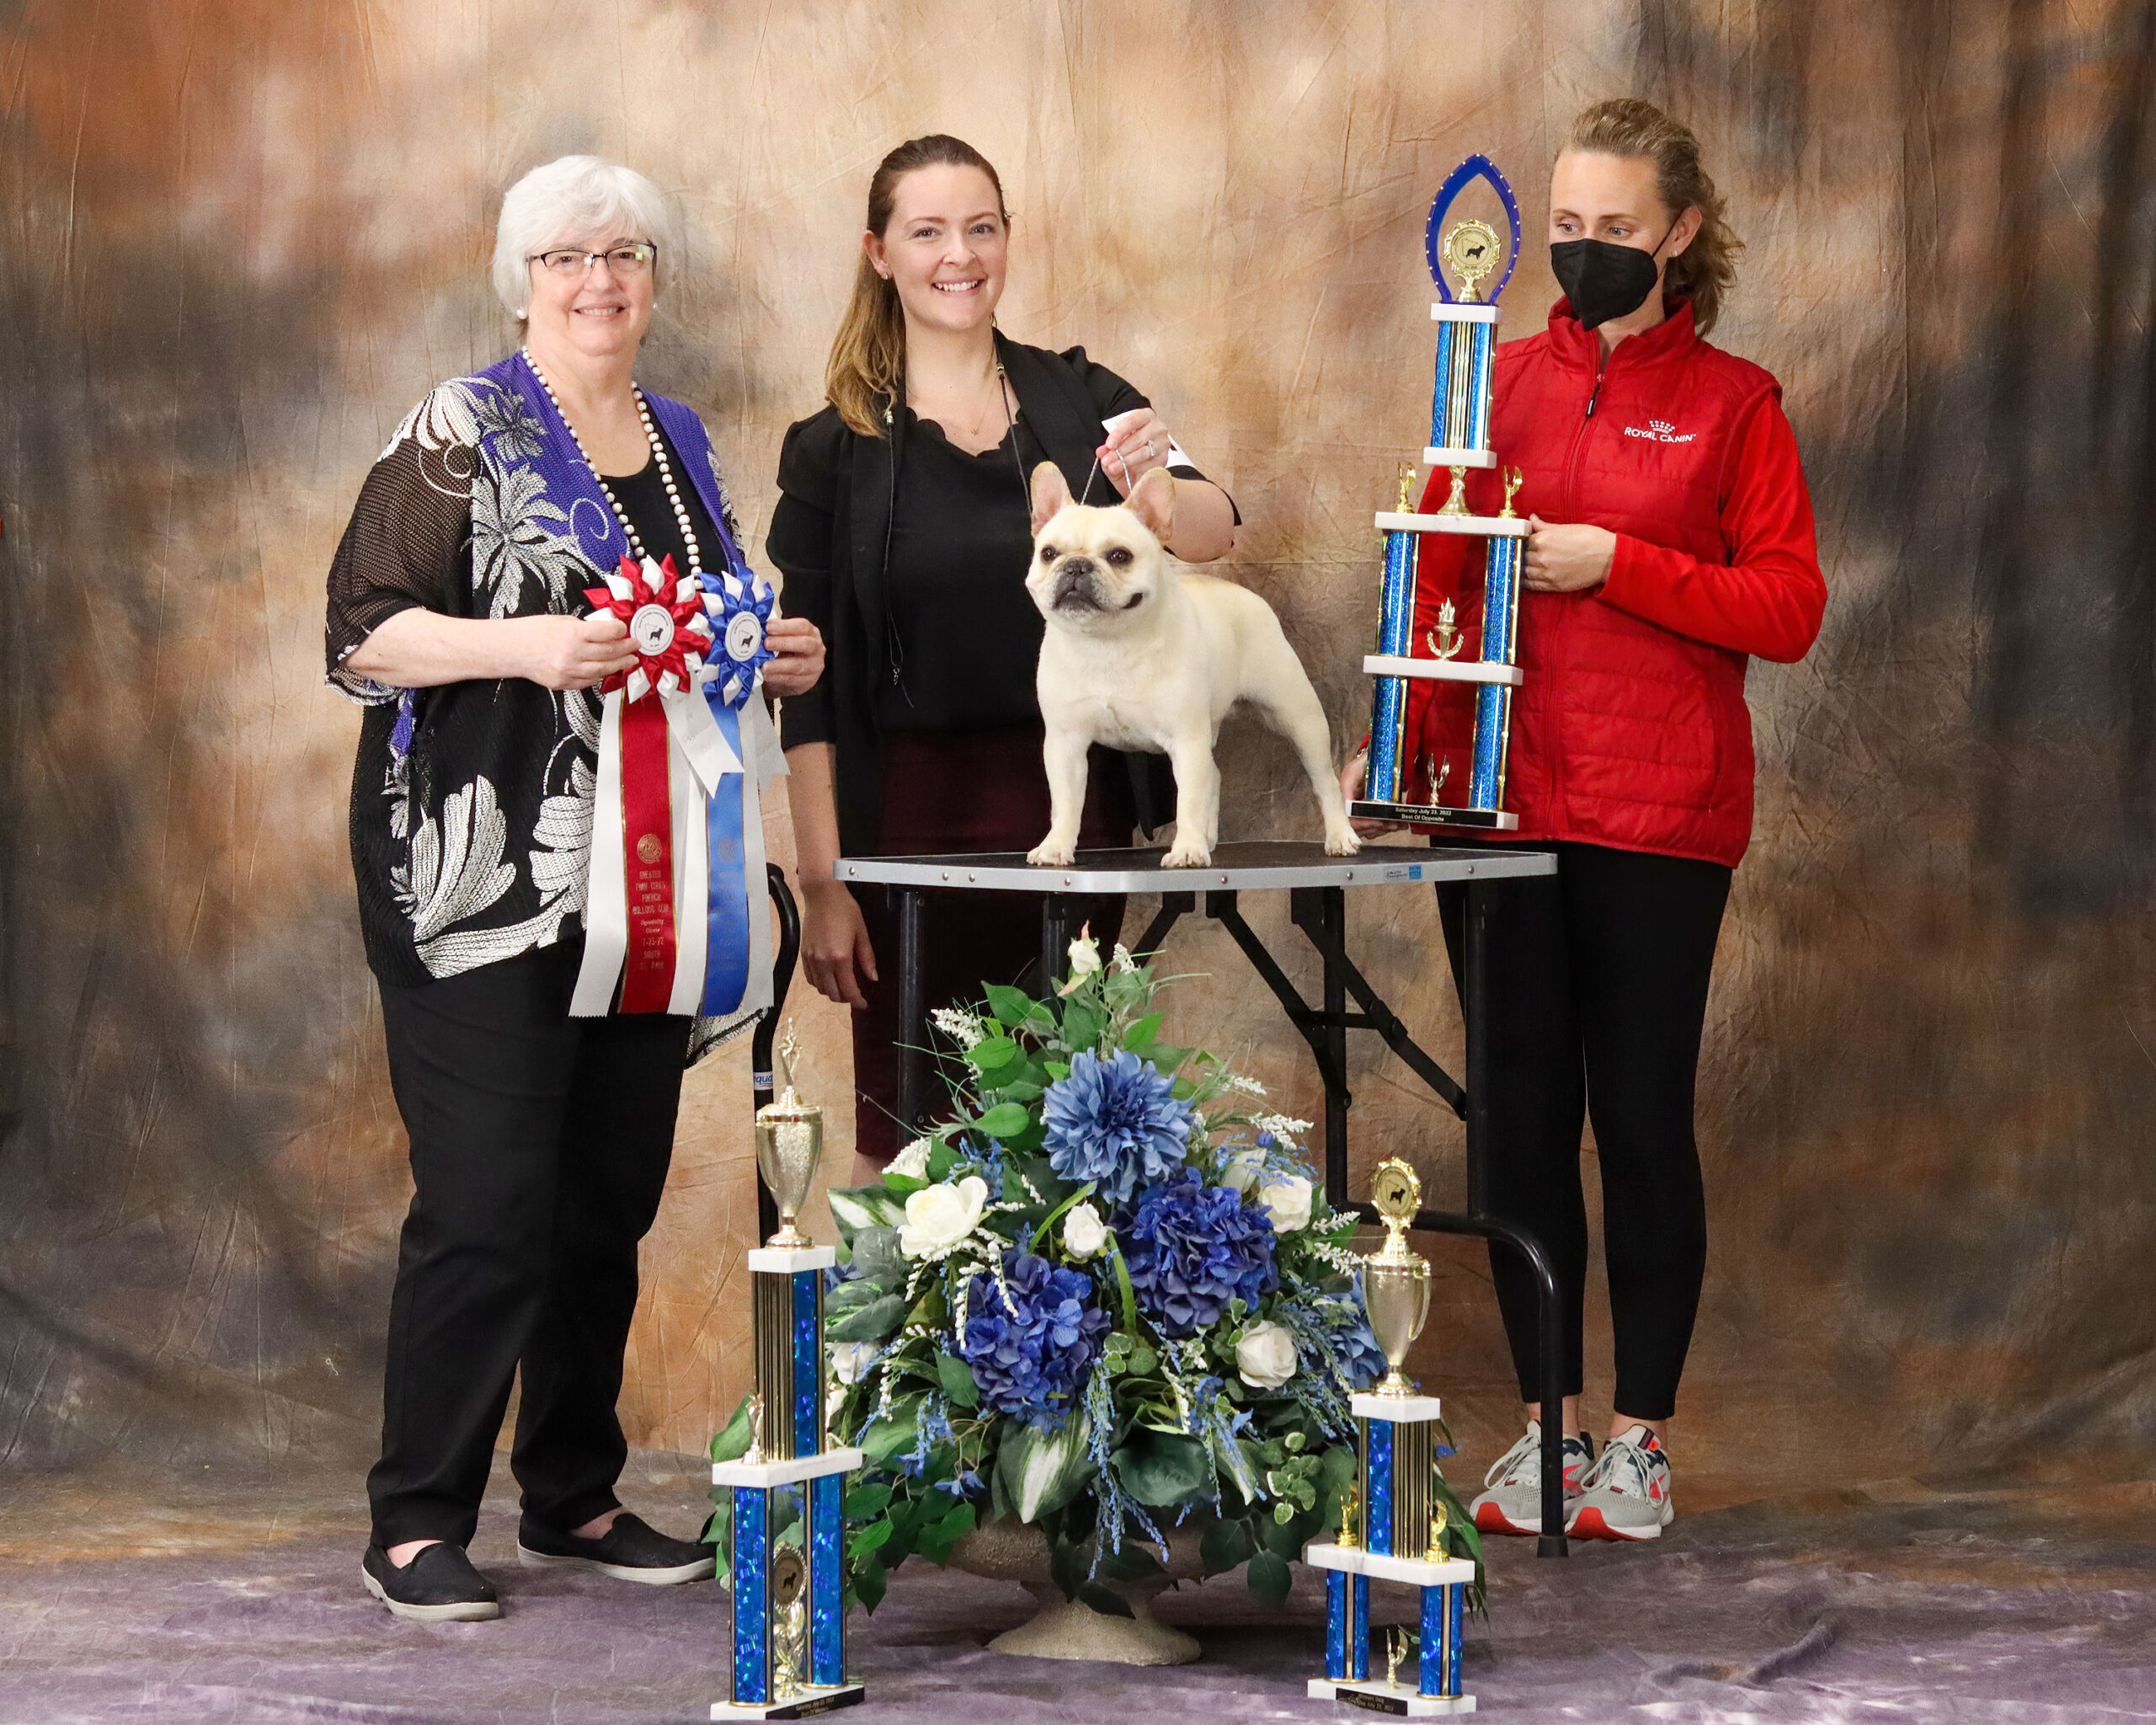 Albert the french bulldog Specialty win at a dog show